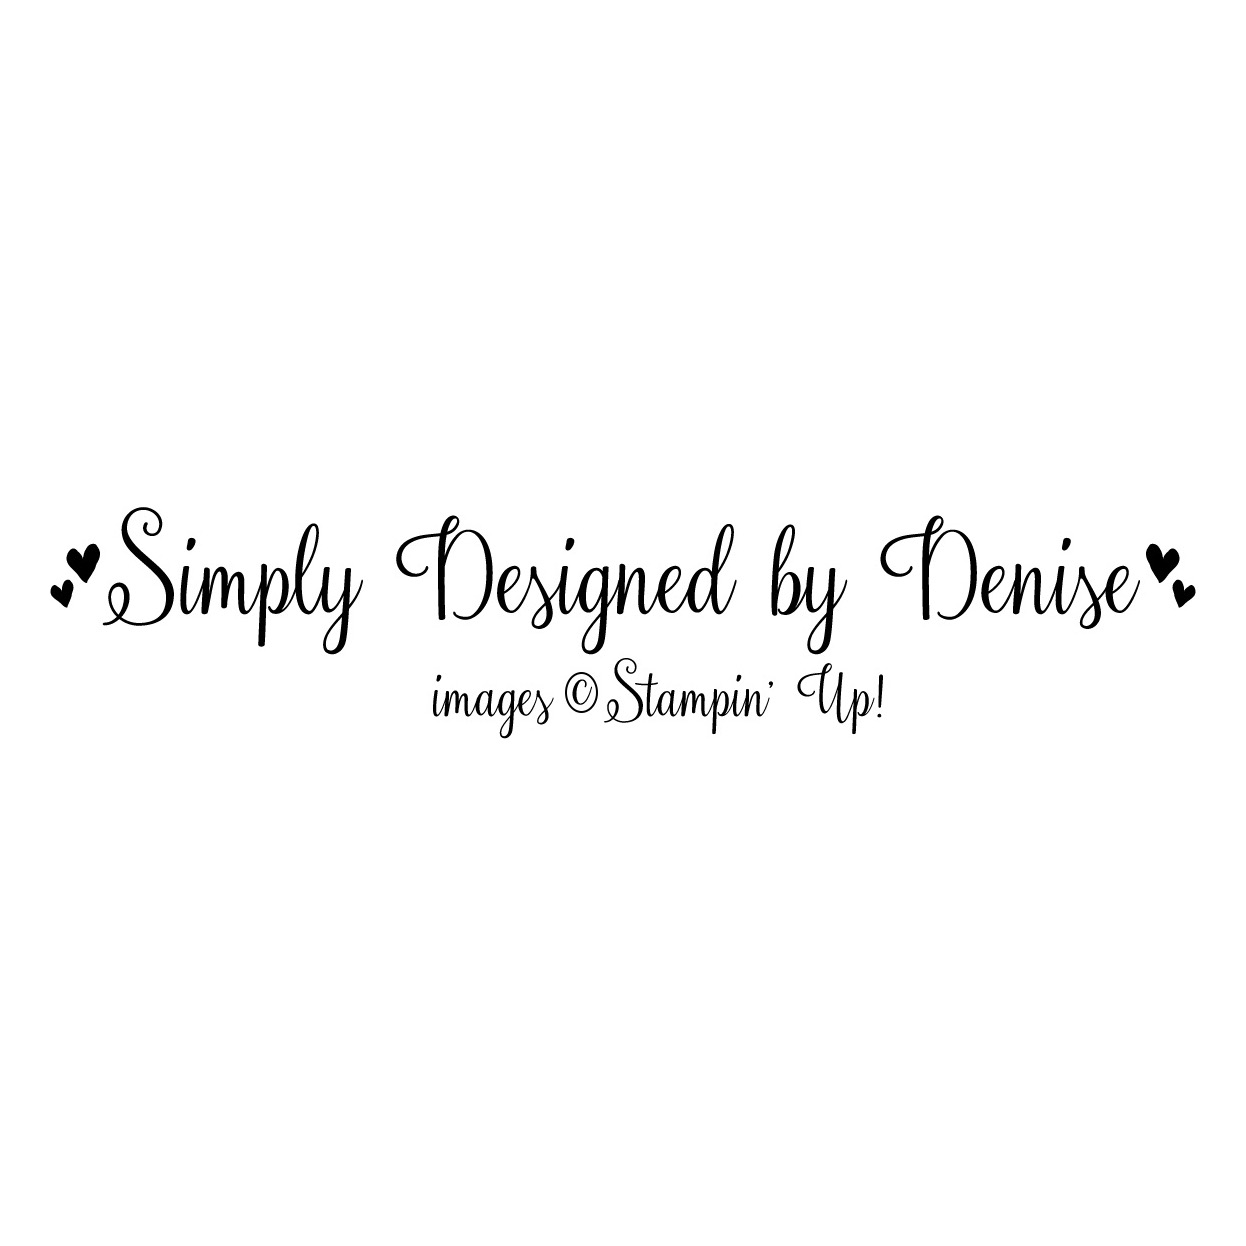 Simply Designed by Denise